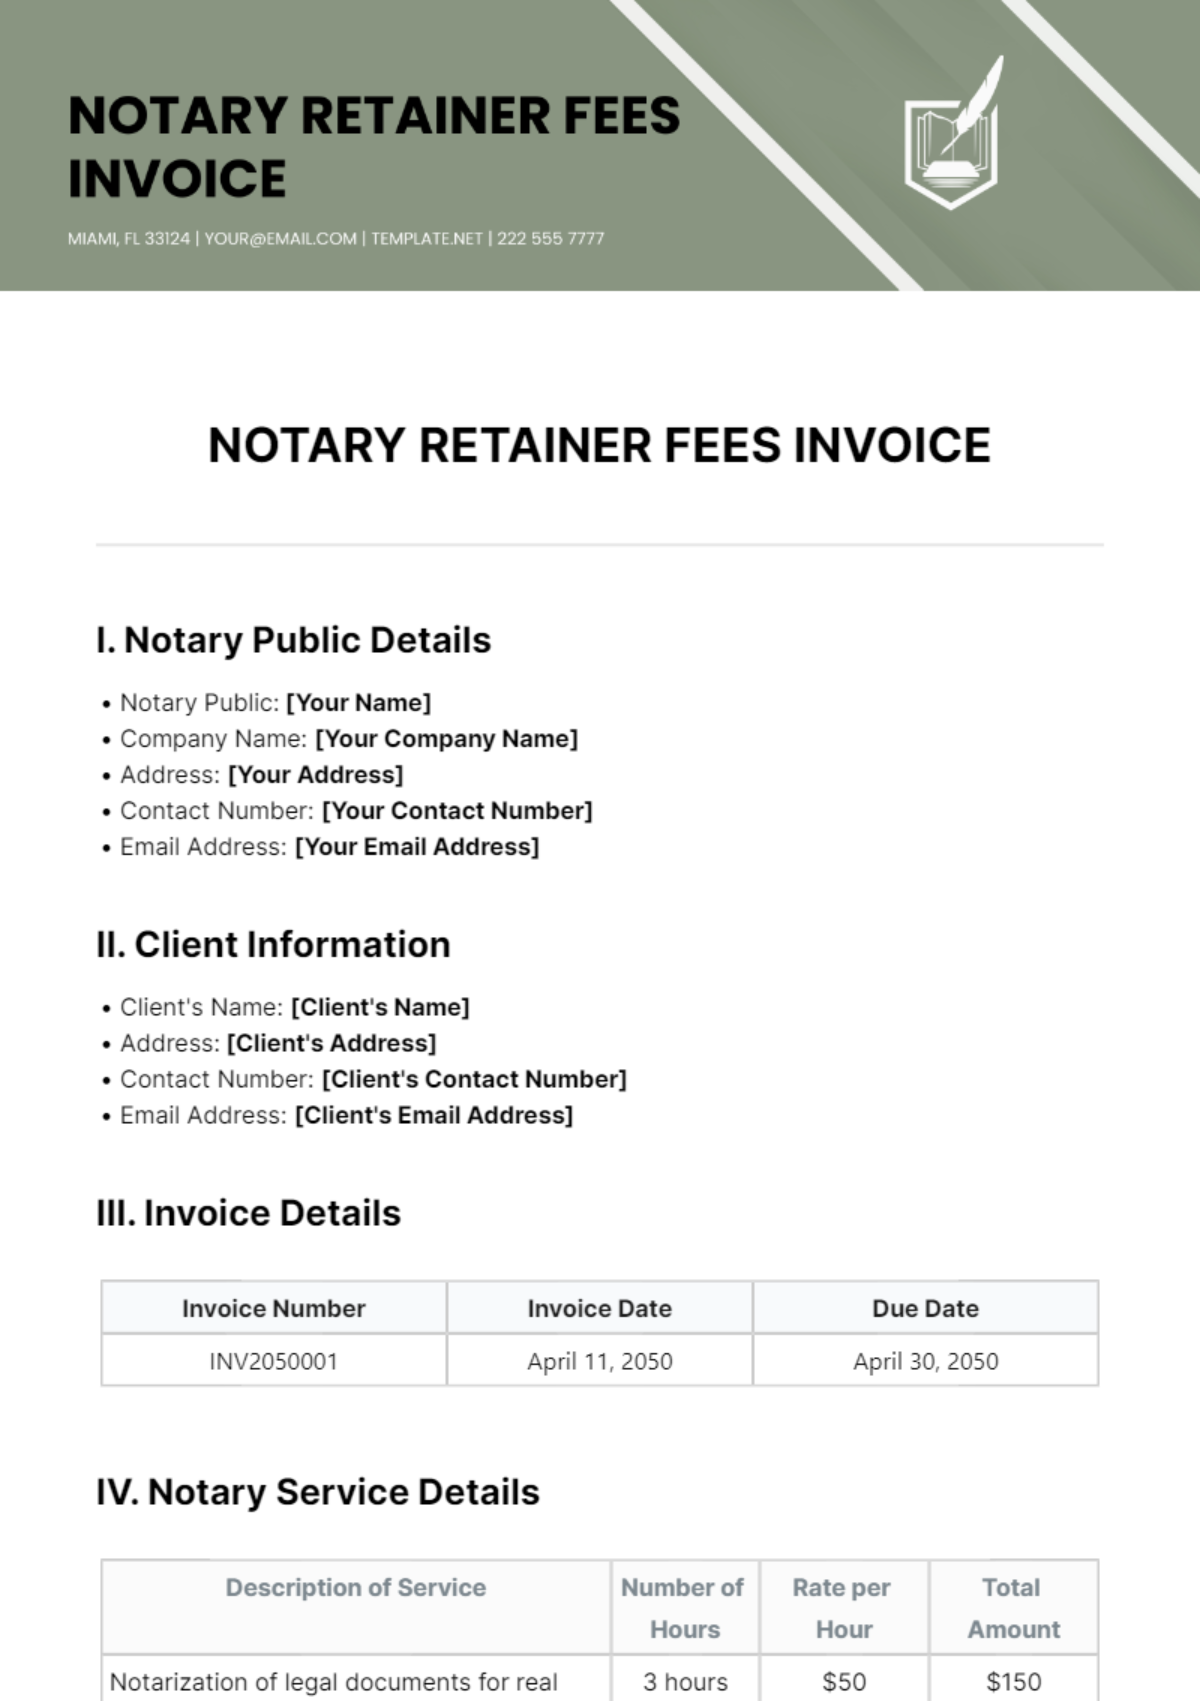 Free Notary Retainer Fees Invoice Template